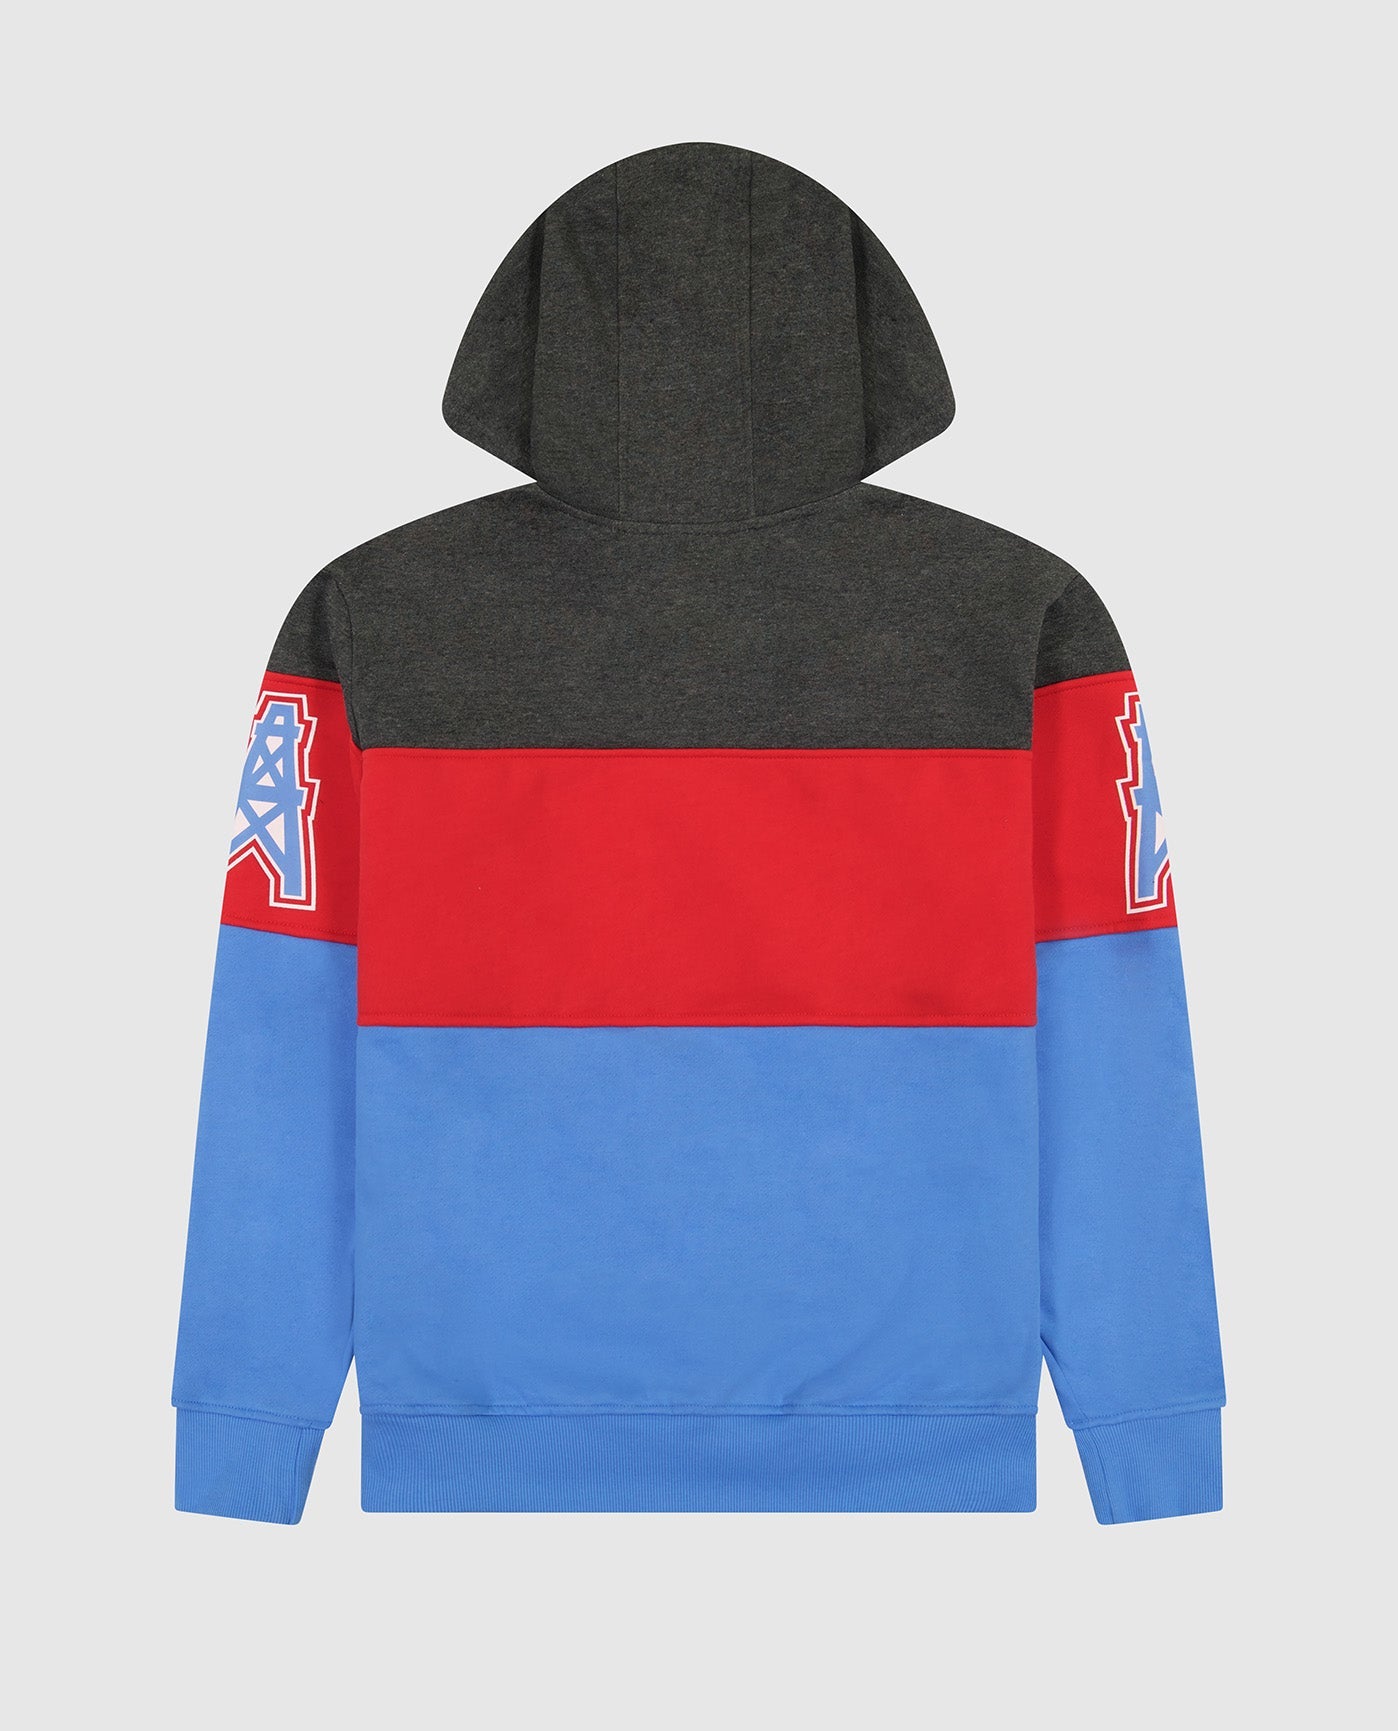 Men's Starter Gray/Red Houston Oilers Extreme Fireballer Throwback Pullover Hoodie Size: Large